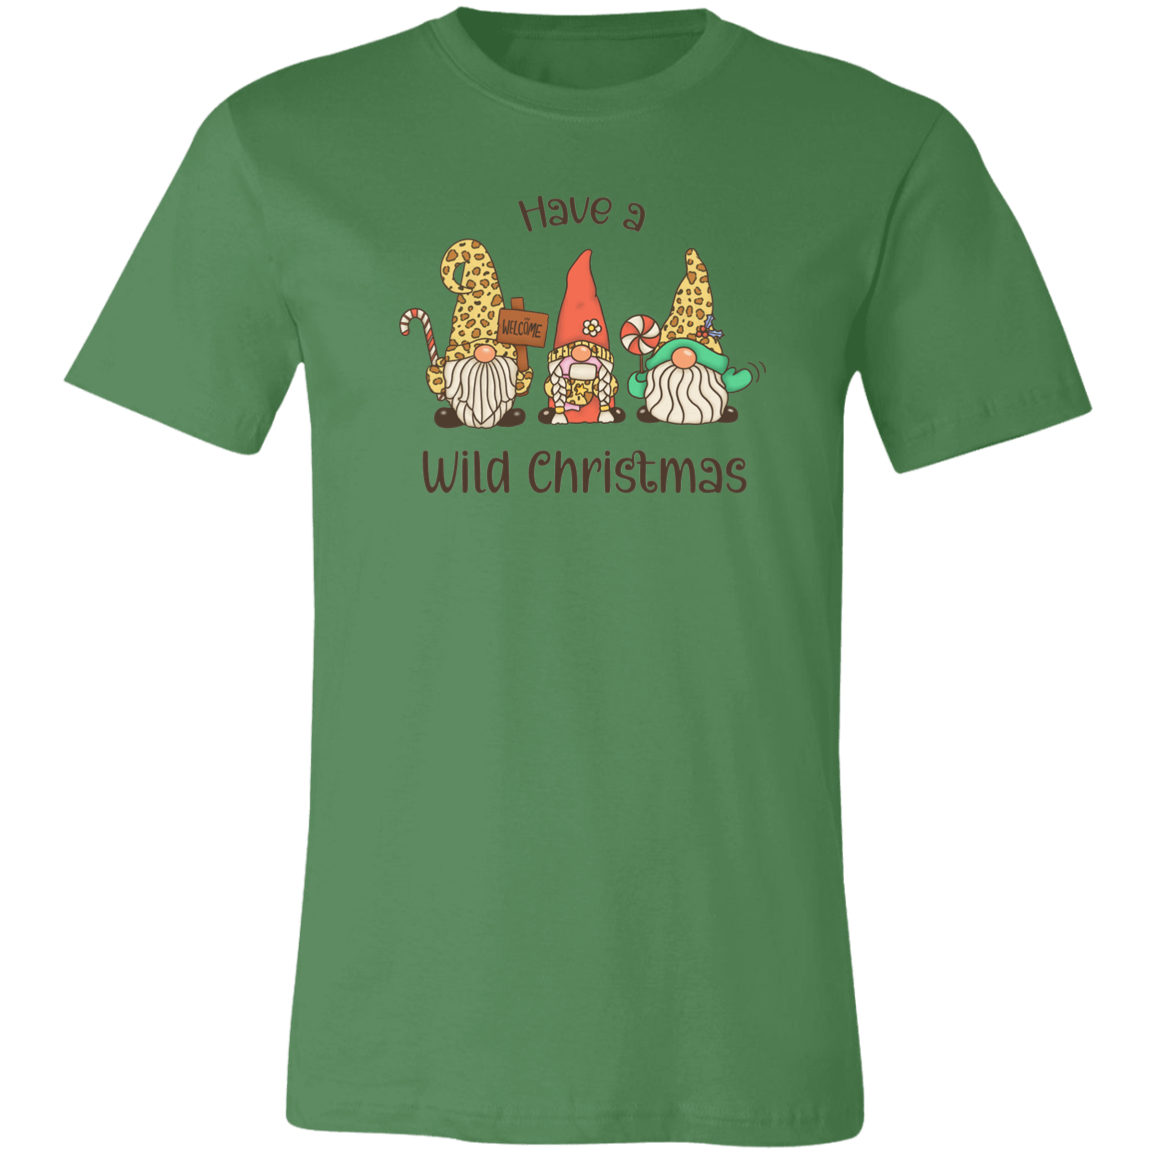 Have A Wild Christmas Shirt